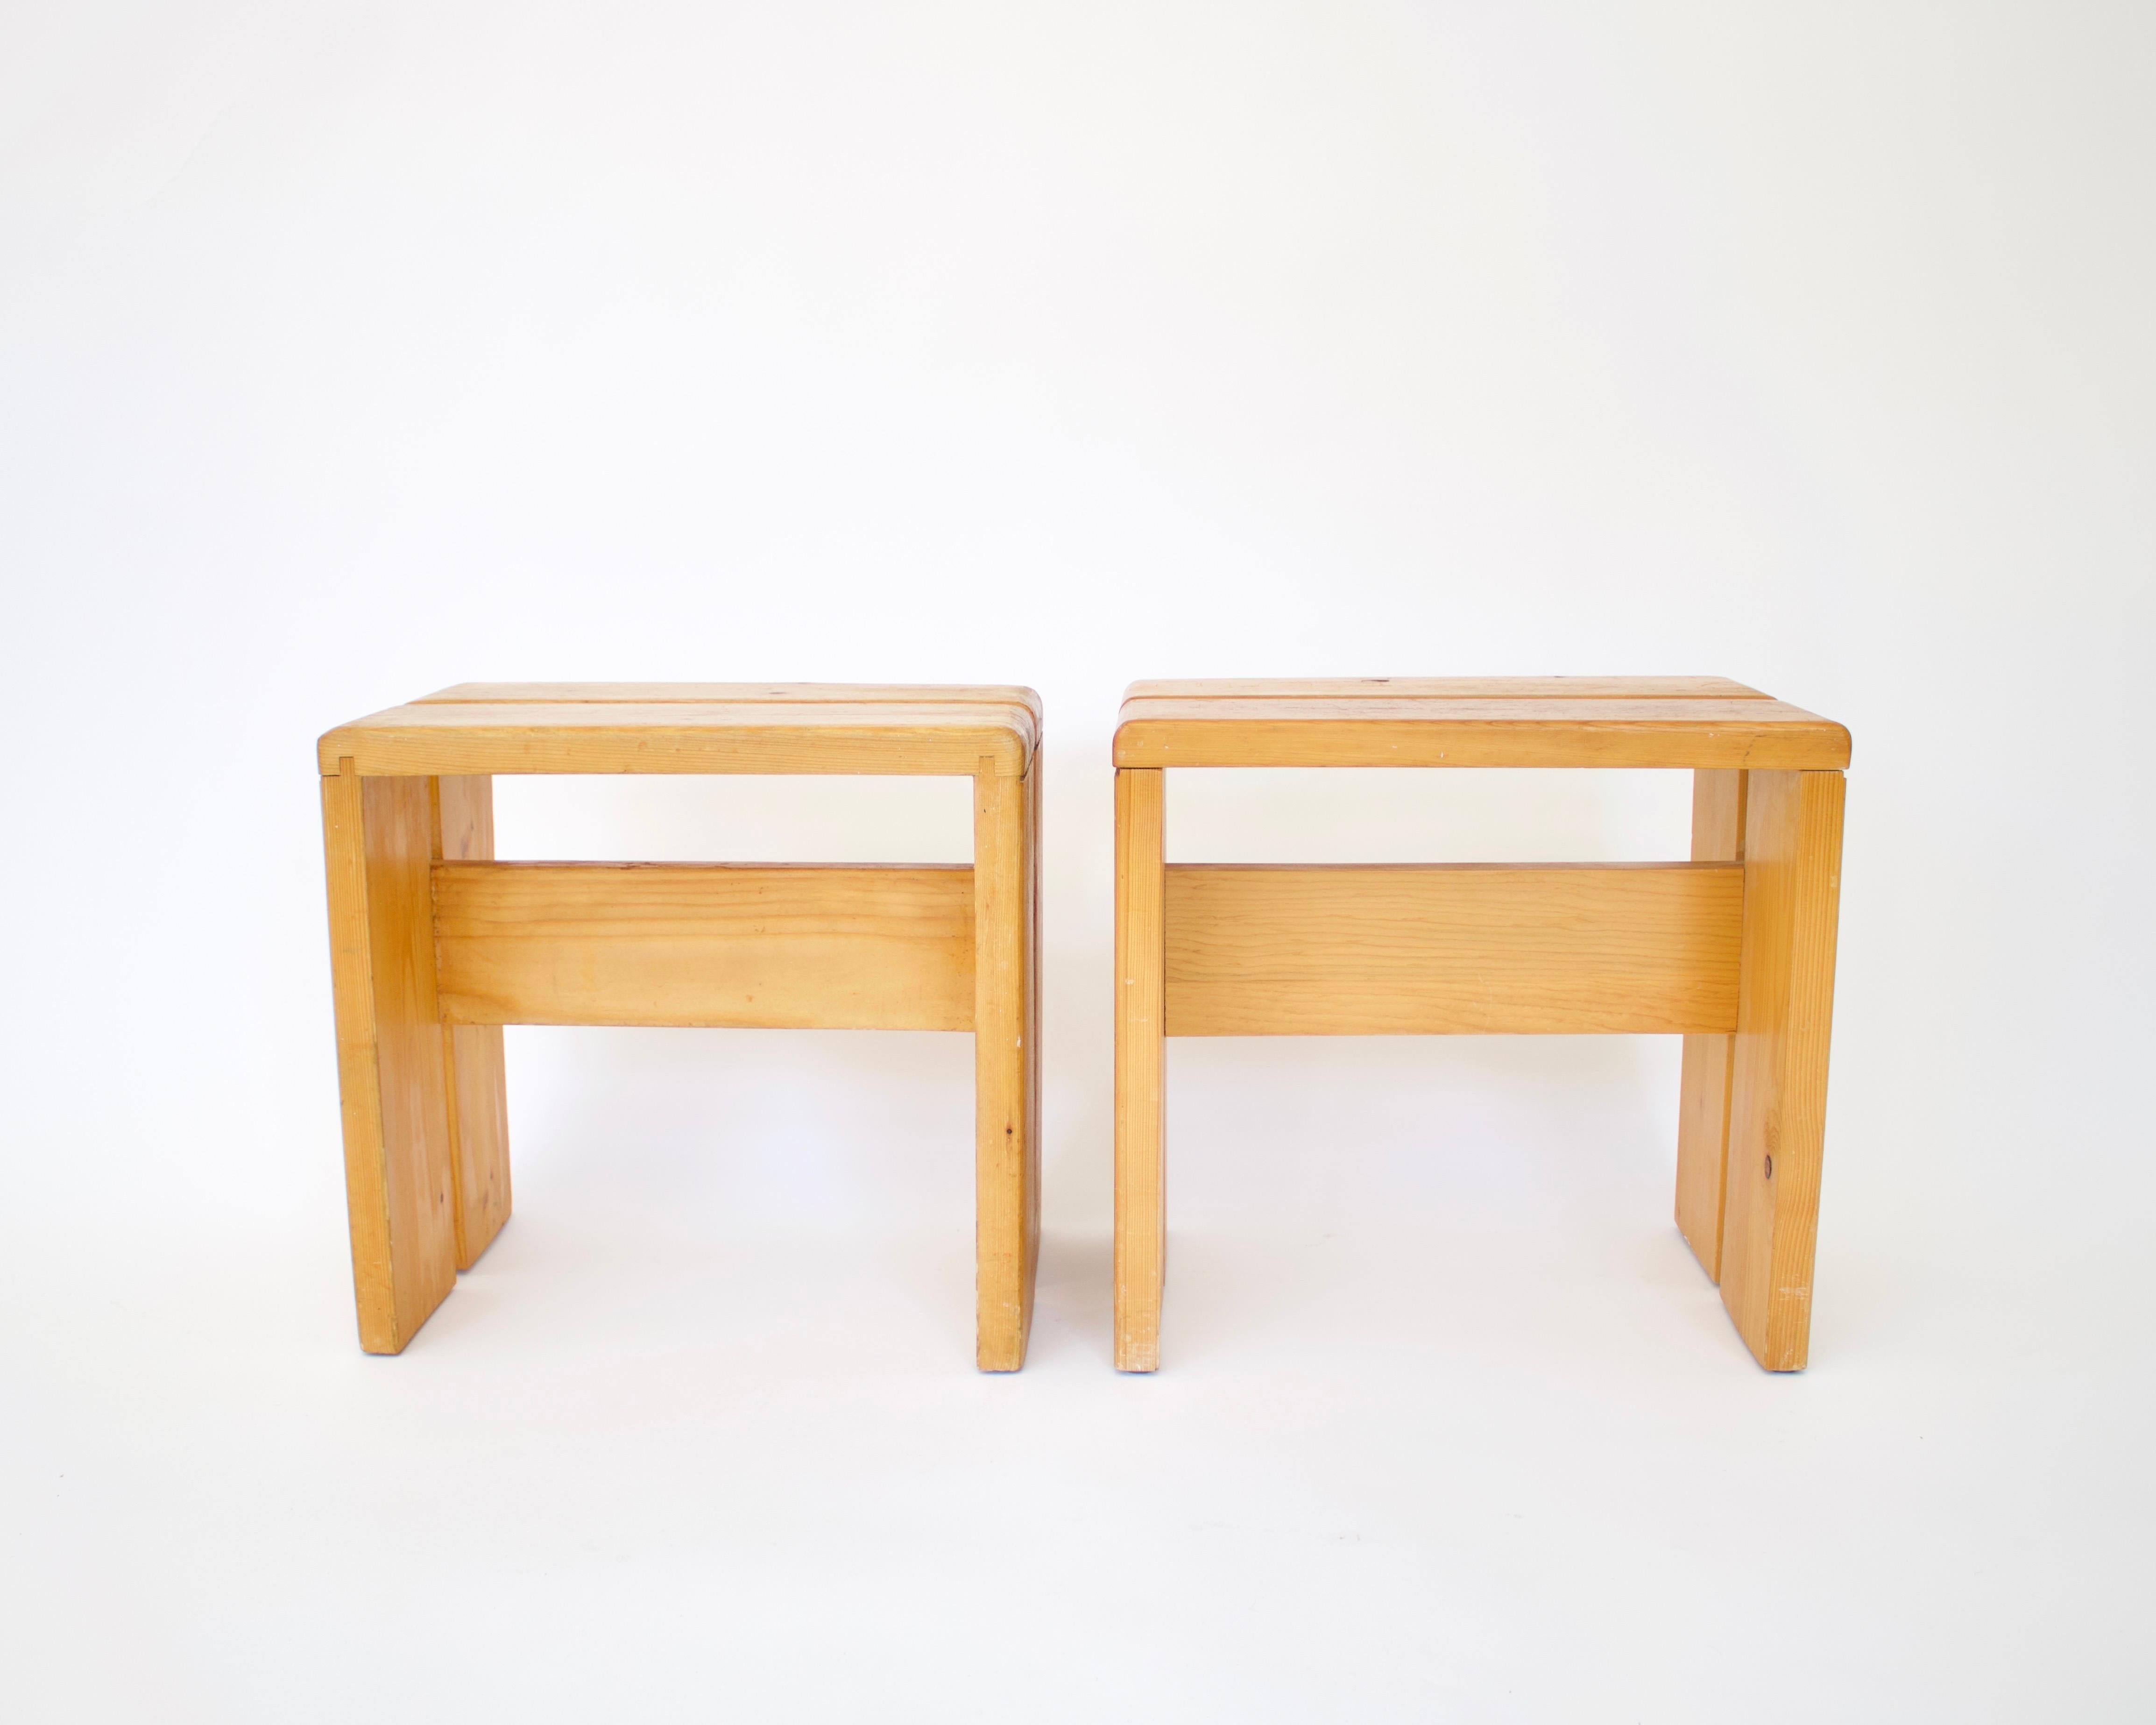 Mid-20th Century Charlotte Perriand Pine Wood Stools for Les Arcs Ski Resort, France, circa 1960 For Sale